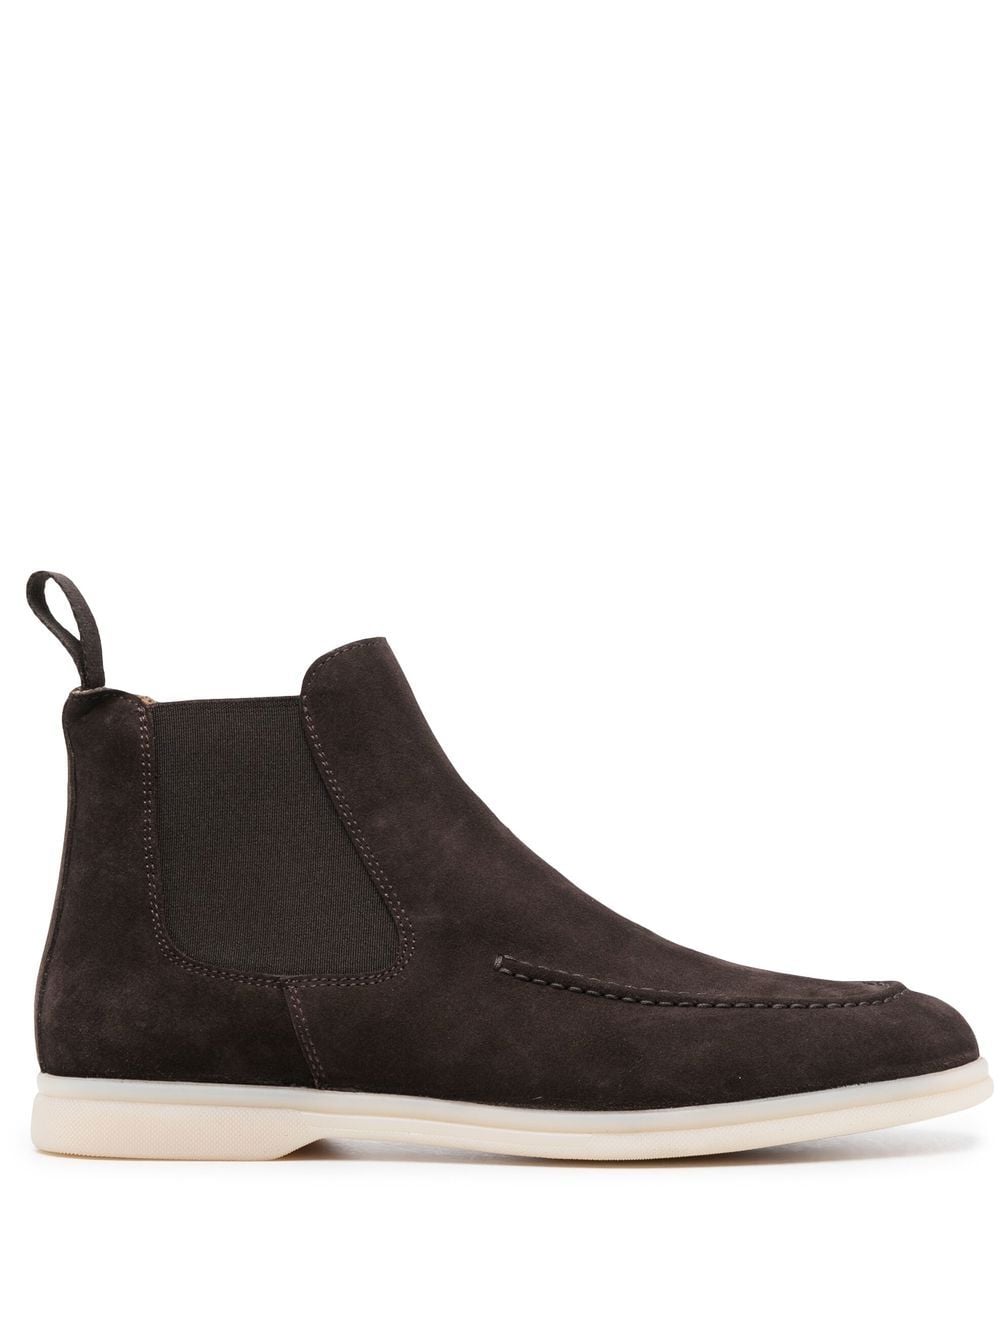 Scarosso Eugenia suede ankle boots - Brown von Scarosso